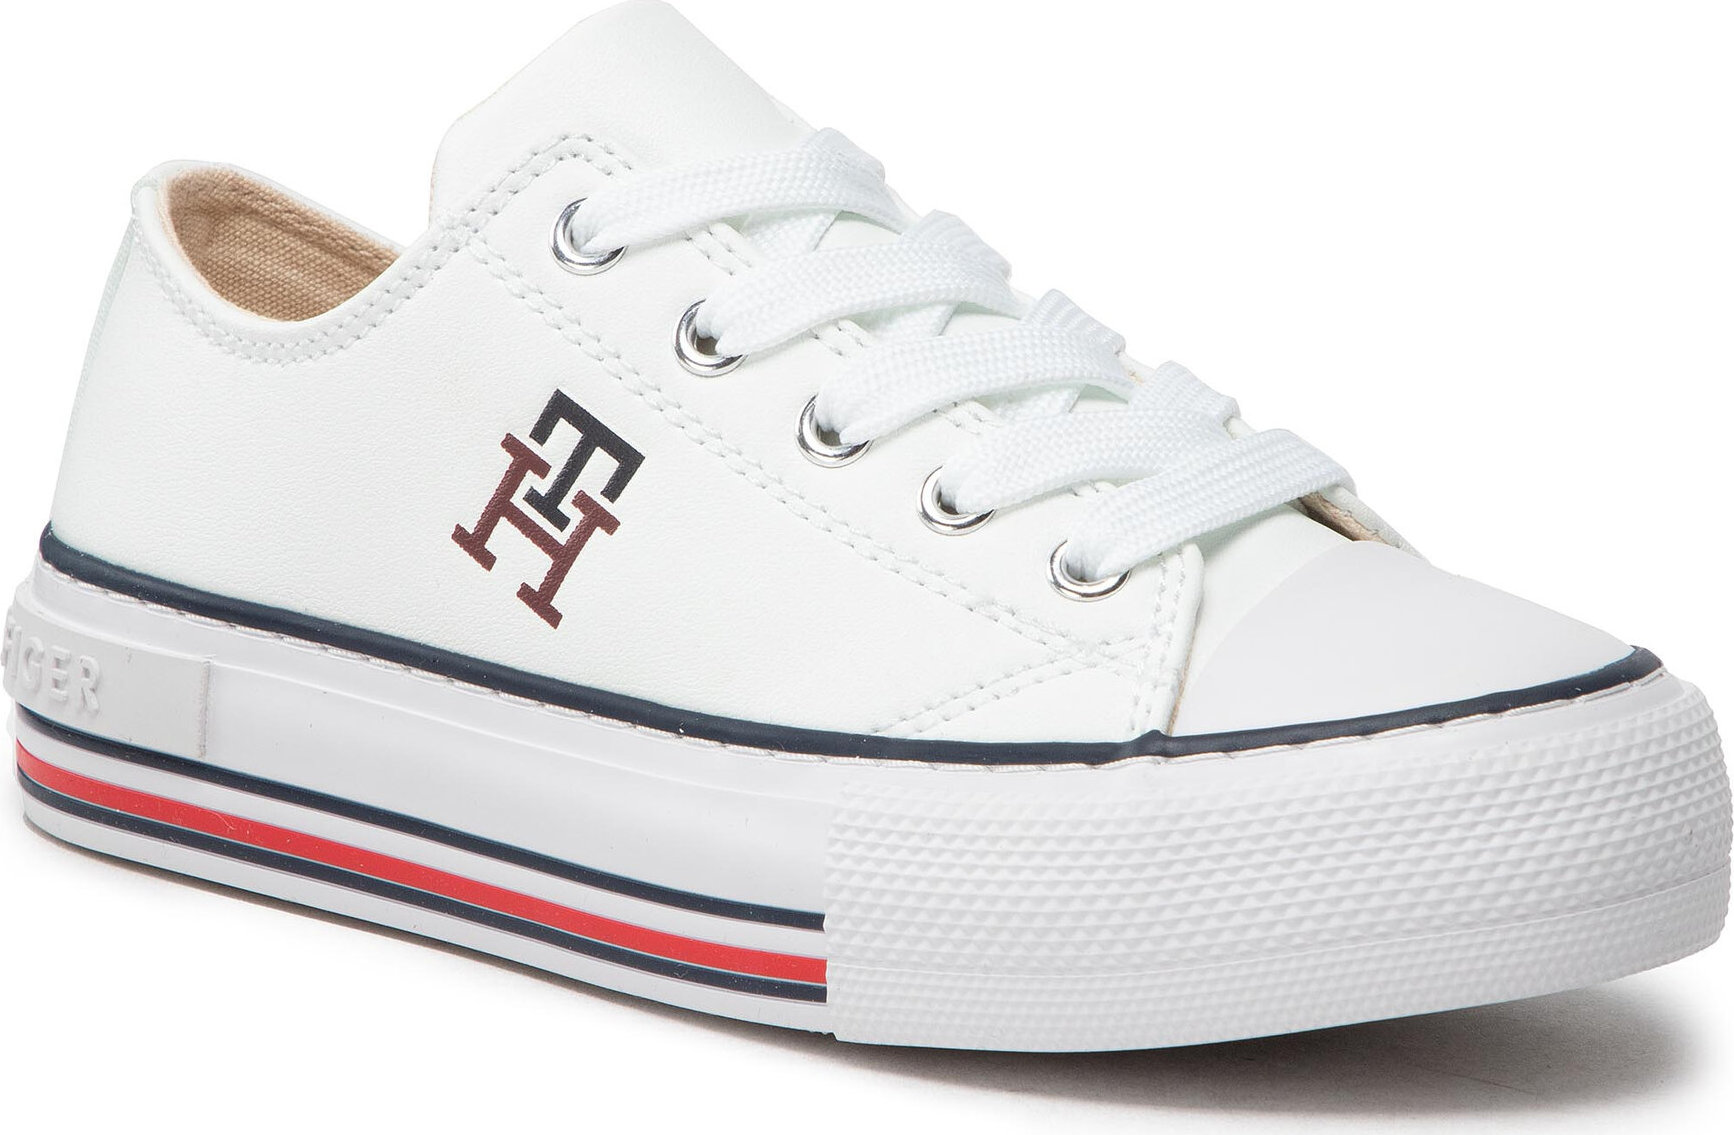 Plátenky Tommy Hilfiger Low Cut Lace Up Sneaker T3A9-32287-1355 M White 100